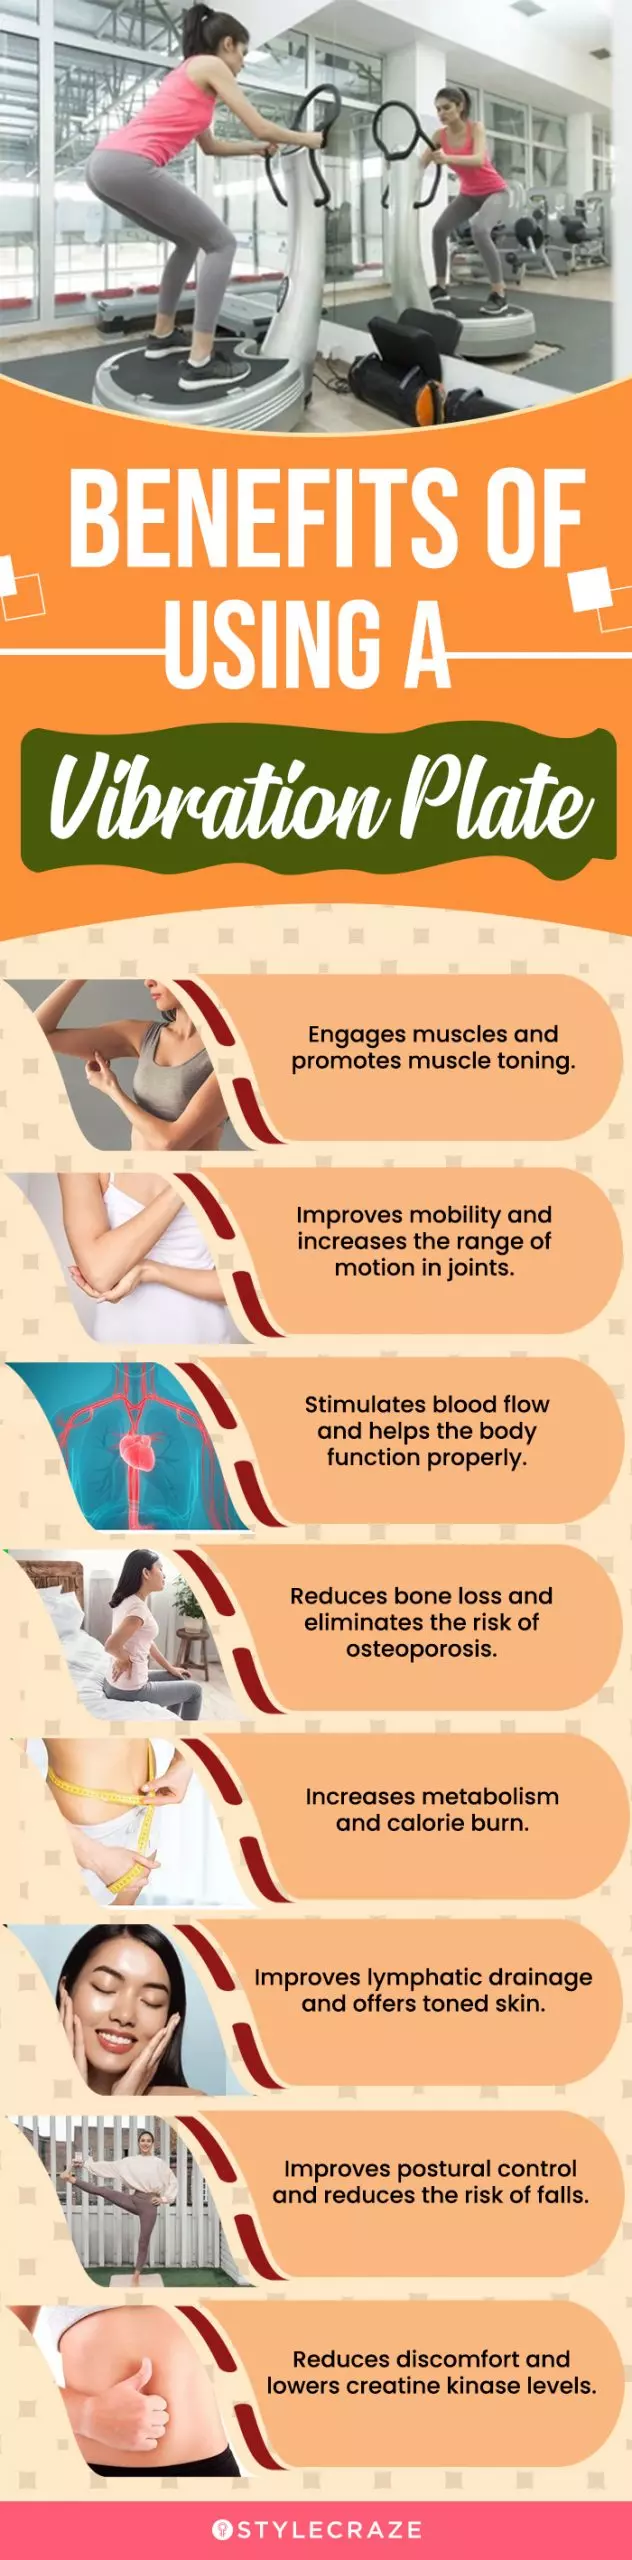 Benefits Of Using A Vibration Plate (infographic)